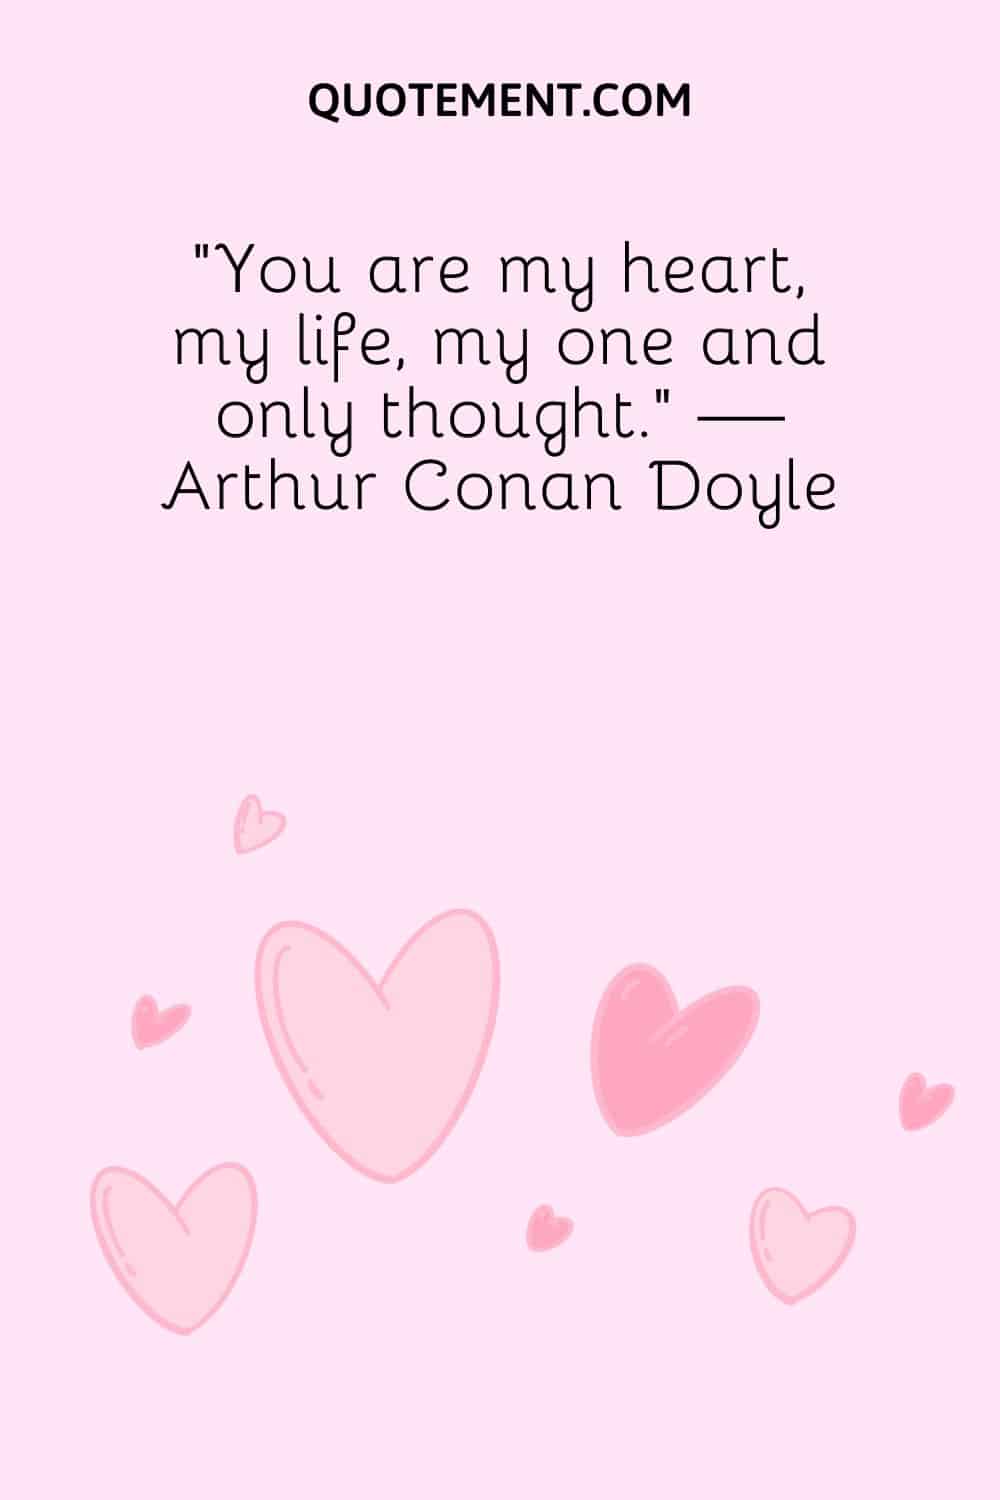 “You are my heart, my life, my one and only thought.” — Arthur Conan Doyle